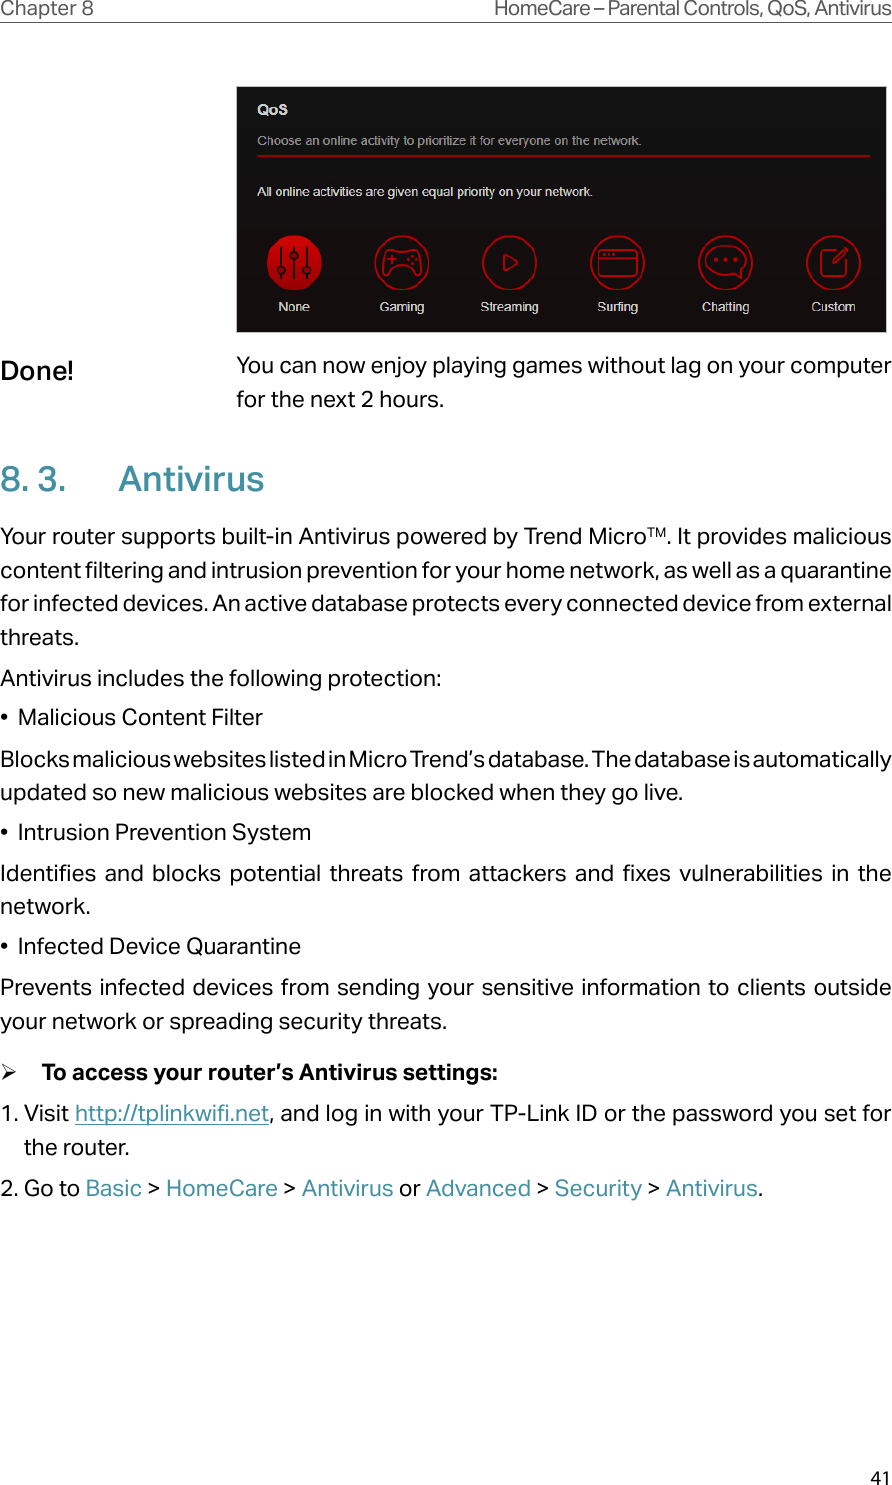 41Chapter 8 HomeCare – Parental Controls, QoS, AntivirusYo u  can now enjoy playing games without lag on your computer for the next 2 hours.8. 3.  AntivirusYour router supports built-in Antivirus powered by Trend MicroTM. It provides malicious content filtering and intrusion prevention for your home network, as well as a quarantine for infected devices. An active database protects every connected device from external threats.Antivirus includes the following protection: •  Malicious Content Filter Blocks malicious websites listed in Micro Trend’s database. The database is automatically updated so new malicious websites are blocked when they go live.•  Intrusion Prevention System Identifies and blocks potential threats from attackers and fixes vulnerabilities in the network. •  Infected Device Quarantine Prevents infected devices from sending your sensitive information to clients outside your network or spreading security threats. ¾To access your router’s Antivirus settings:1. Visit http://tplinkwifi.net, and log in with your TP-Link ID or the password you set for the router.2. Go to Basic &gt; HomeCare &gt; Antivirus or Advanced &gt; Security &gt; Antivirus.Done!